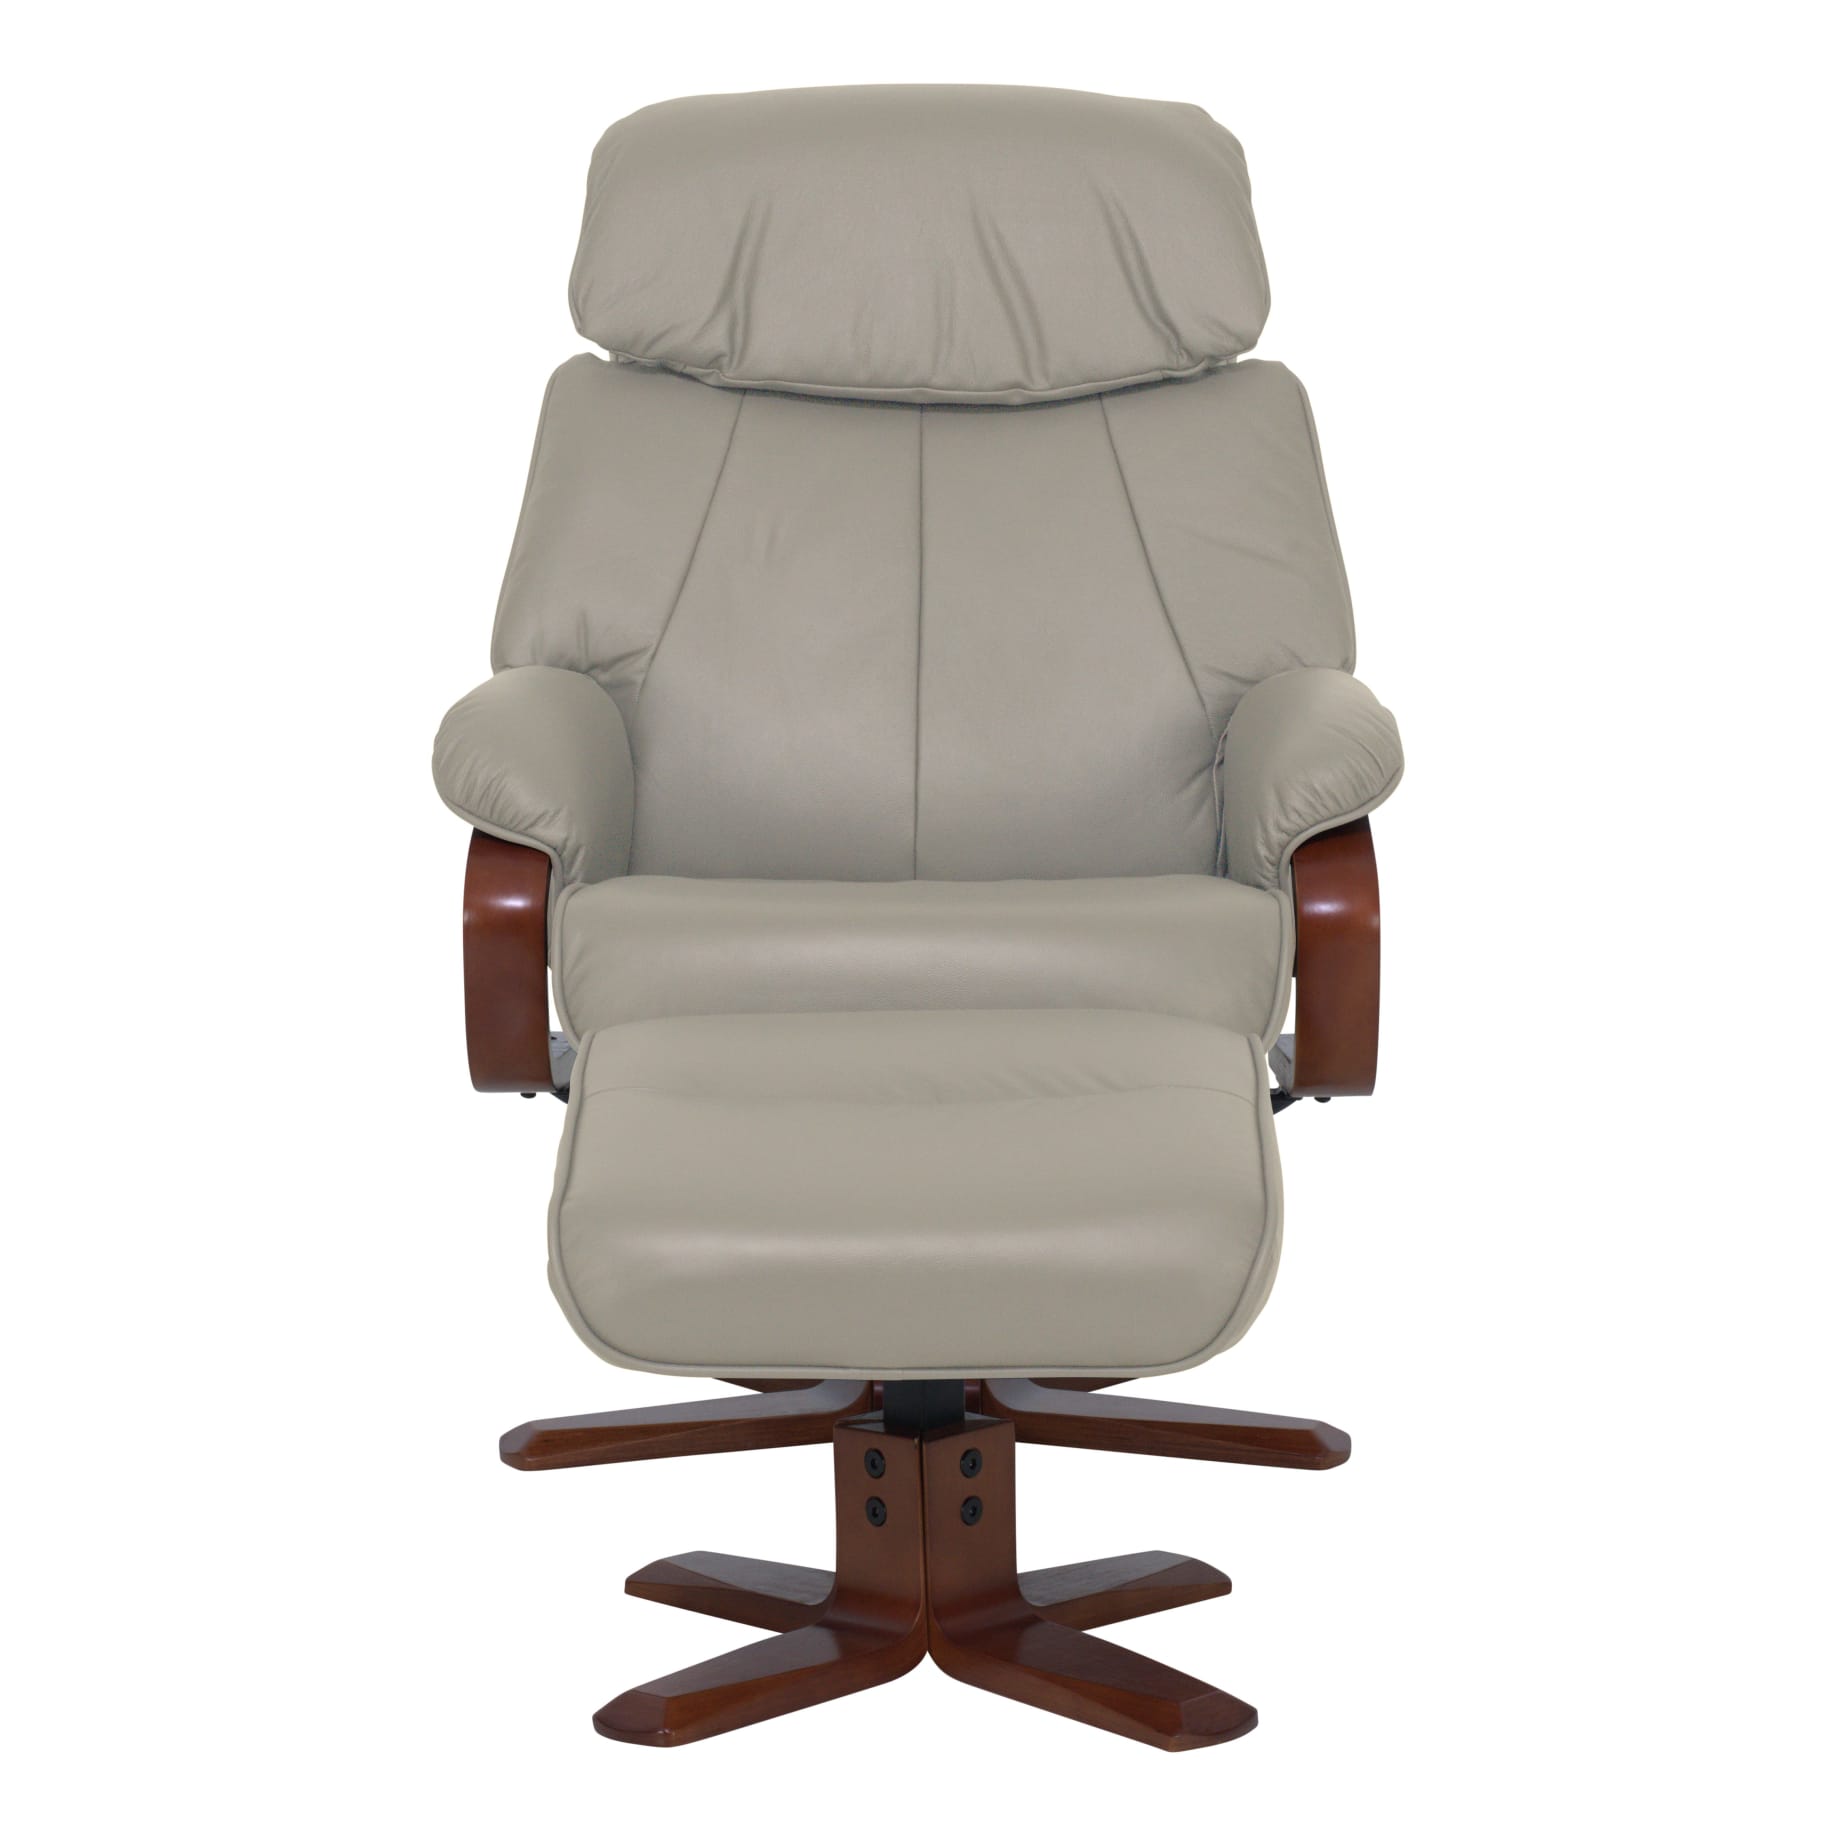 Turner Recliner + Ottoman in Almond/ Chocolate